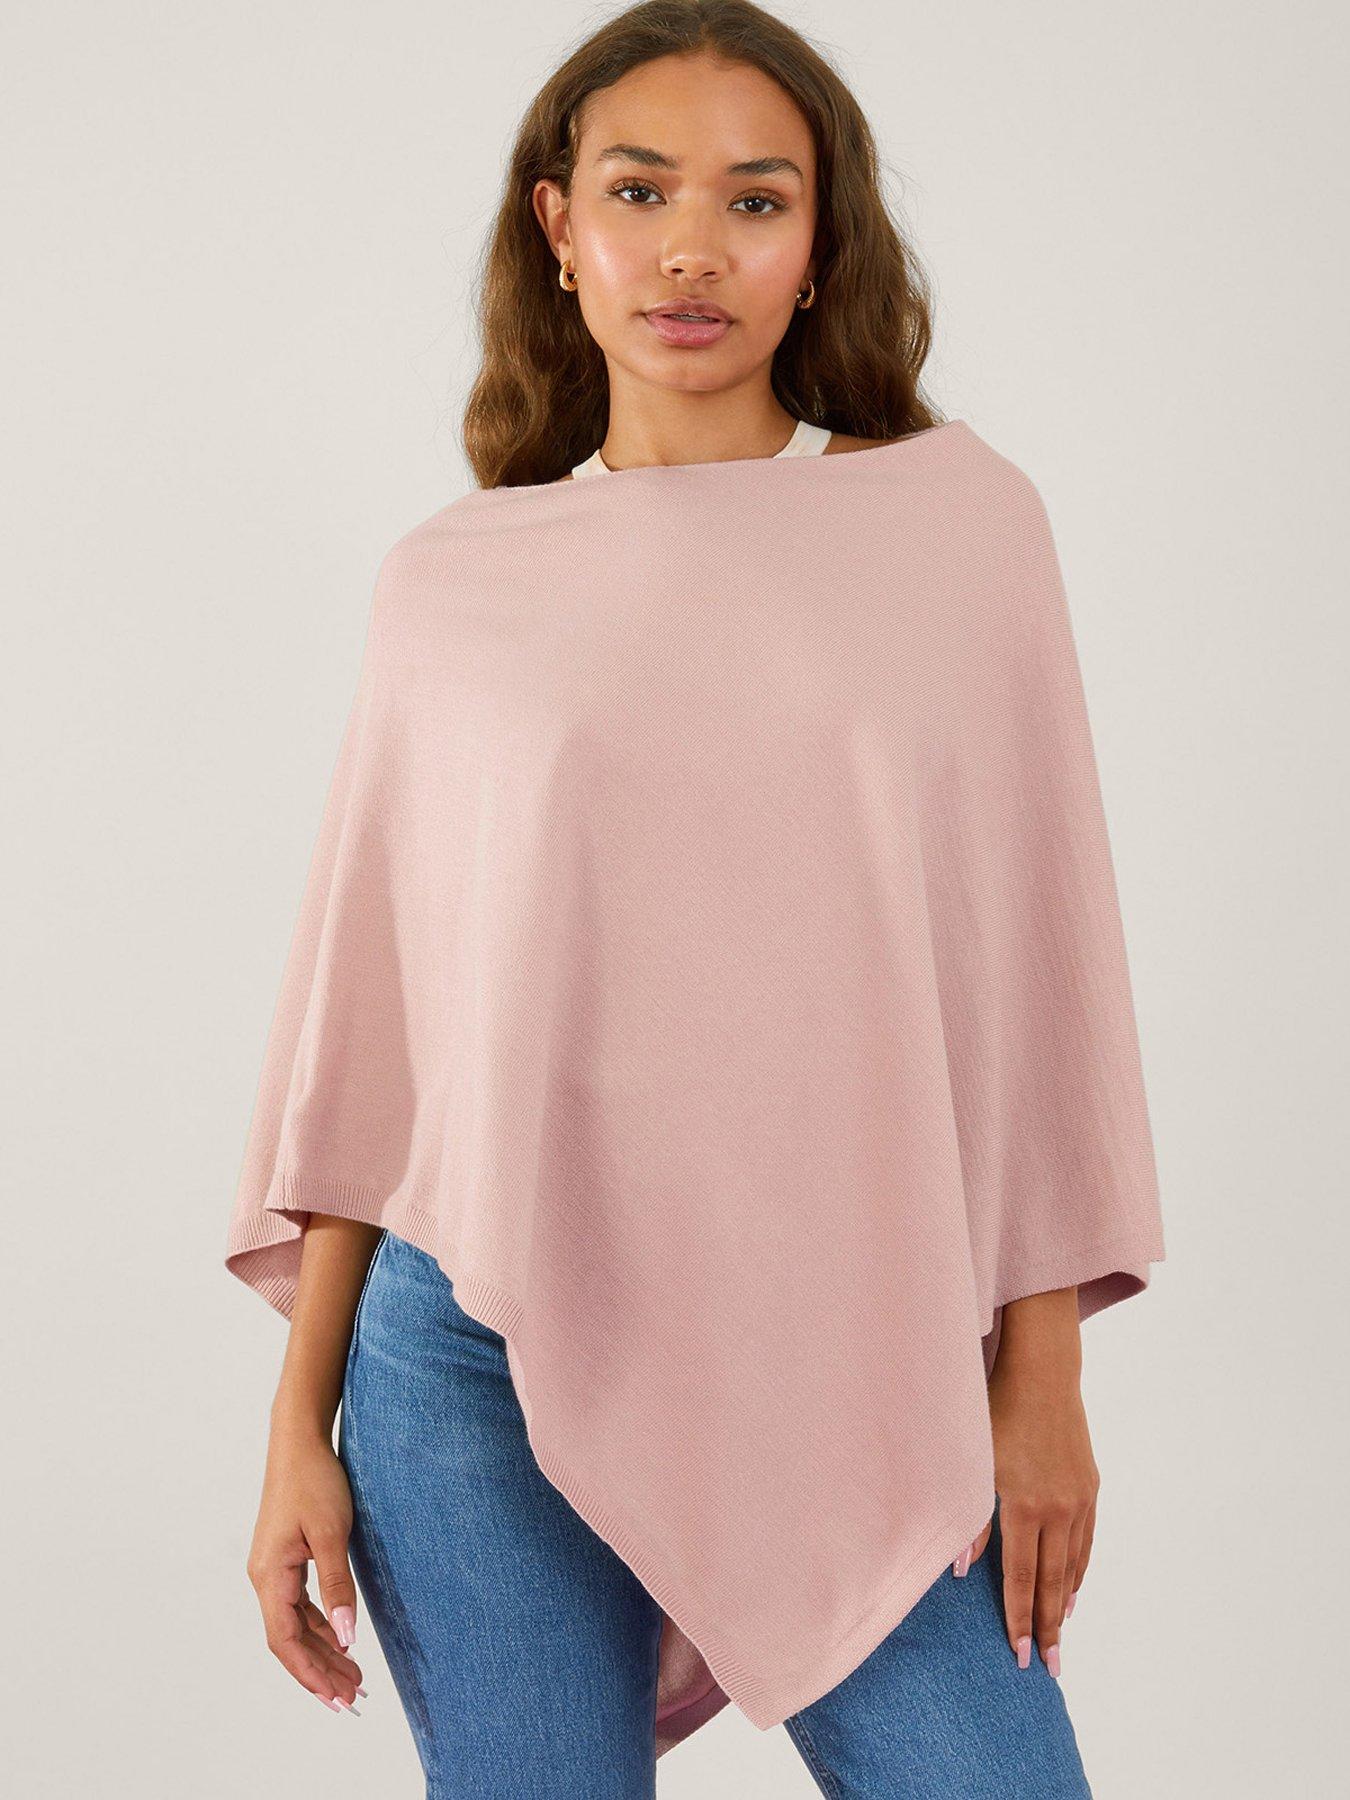 Accessorize Perfect Knit Poncho - Pink | very.co.uk